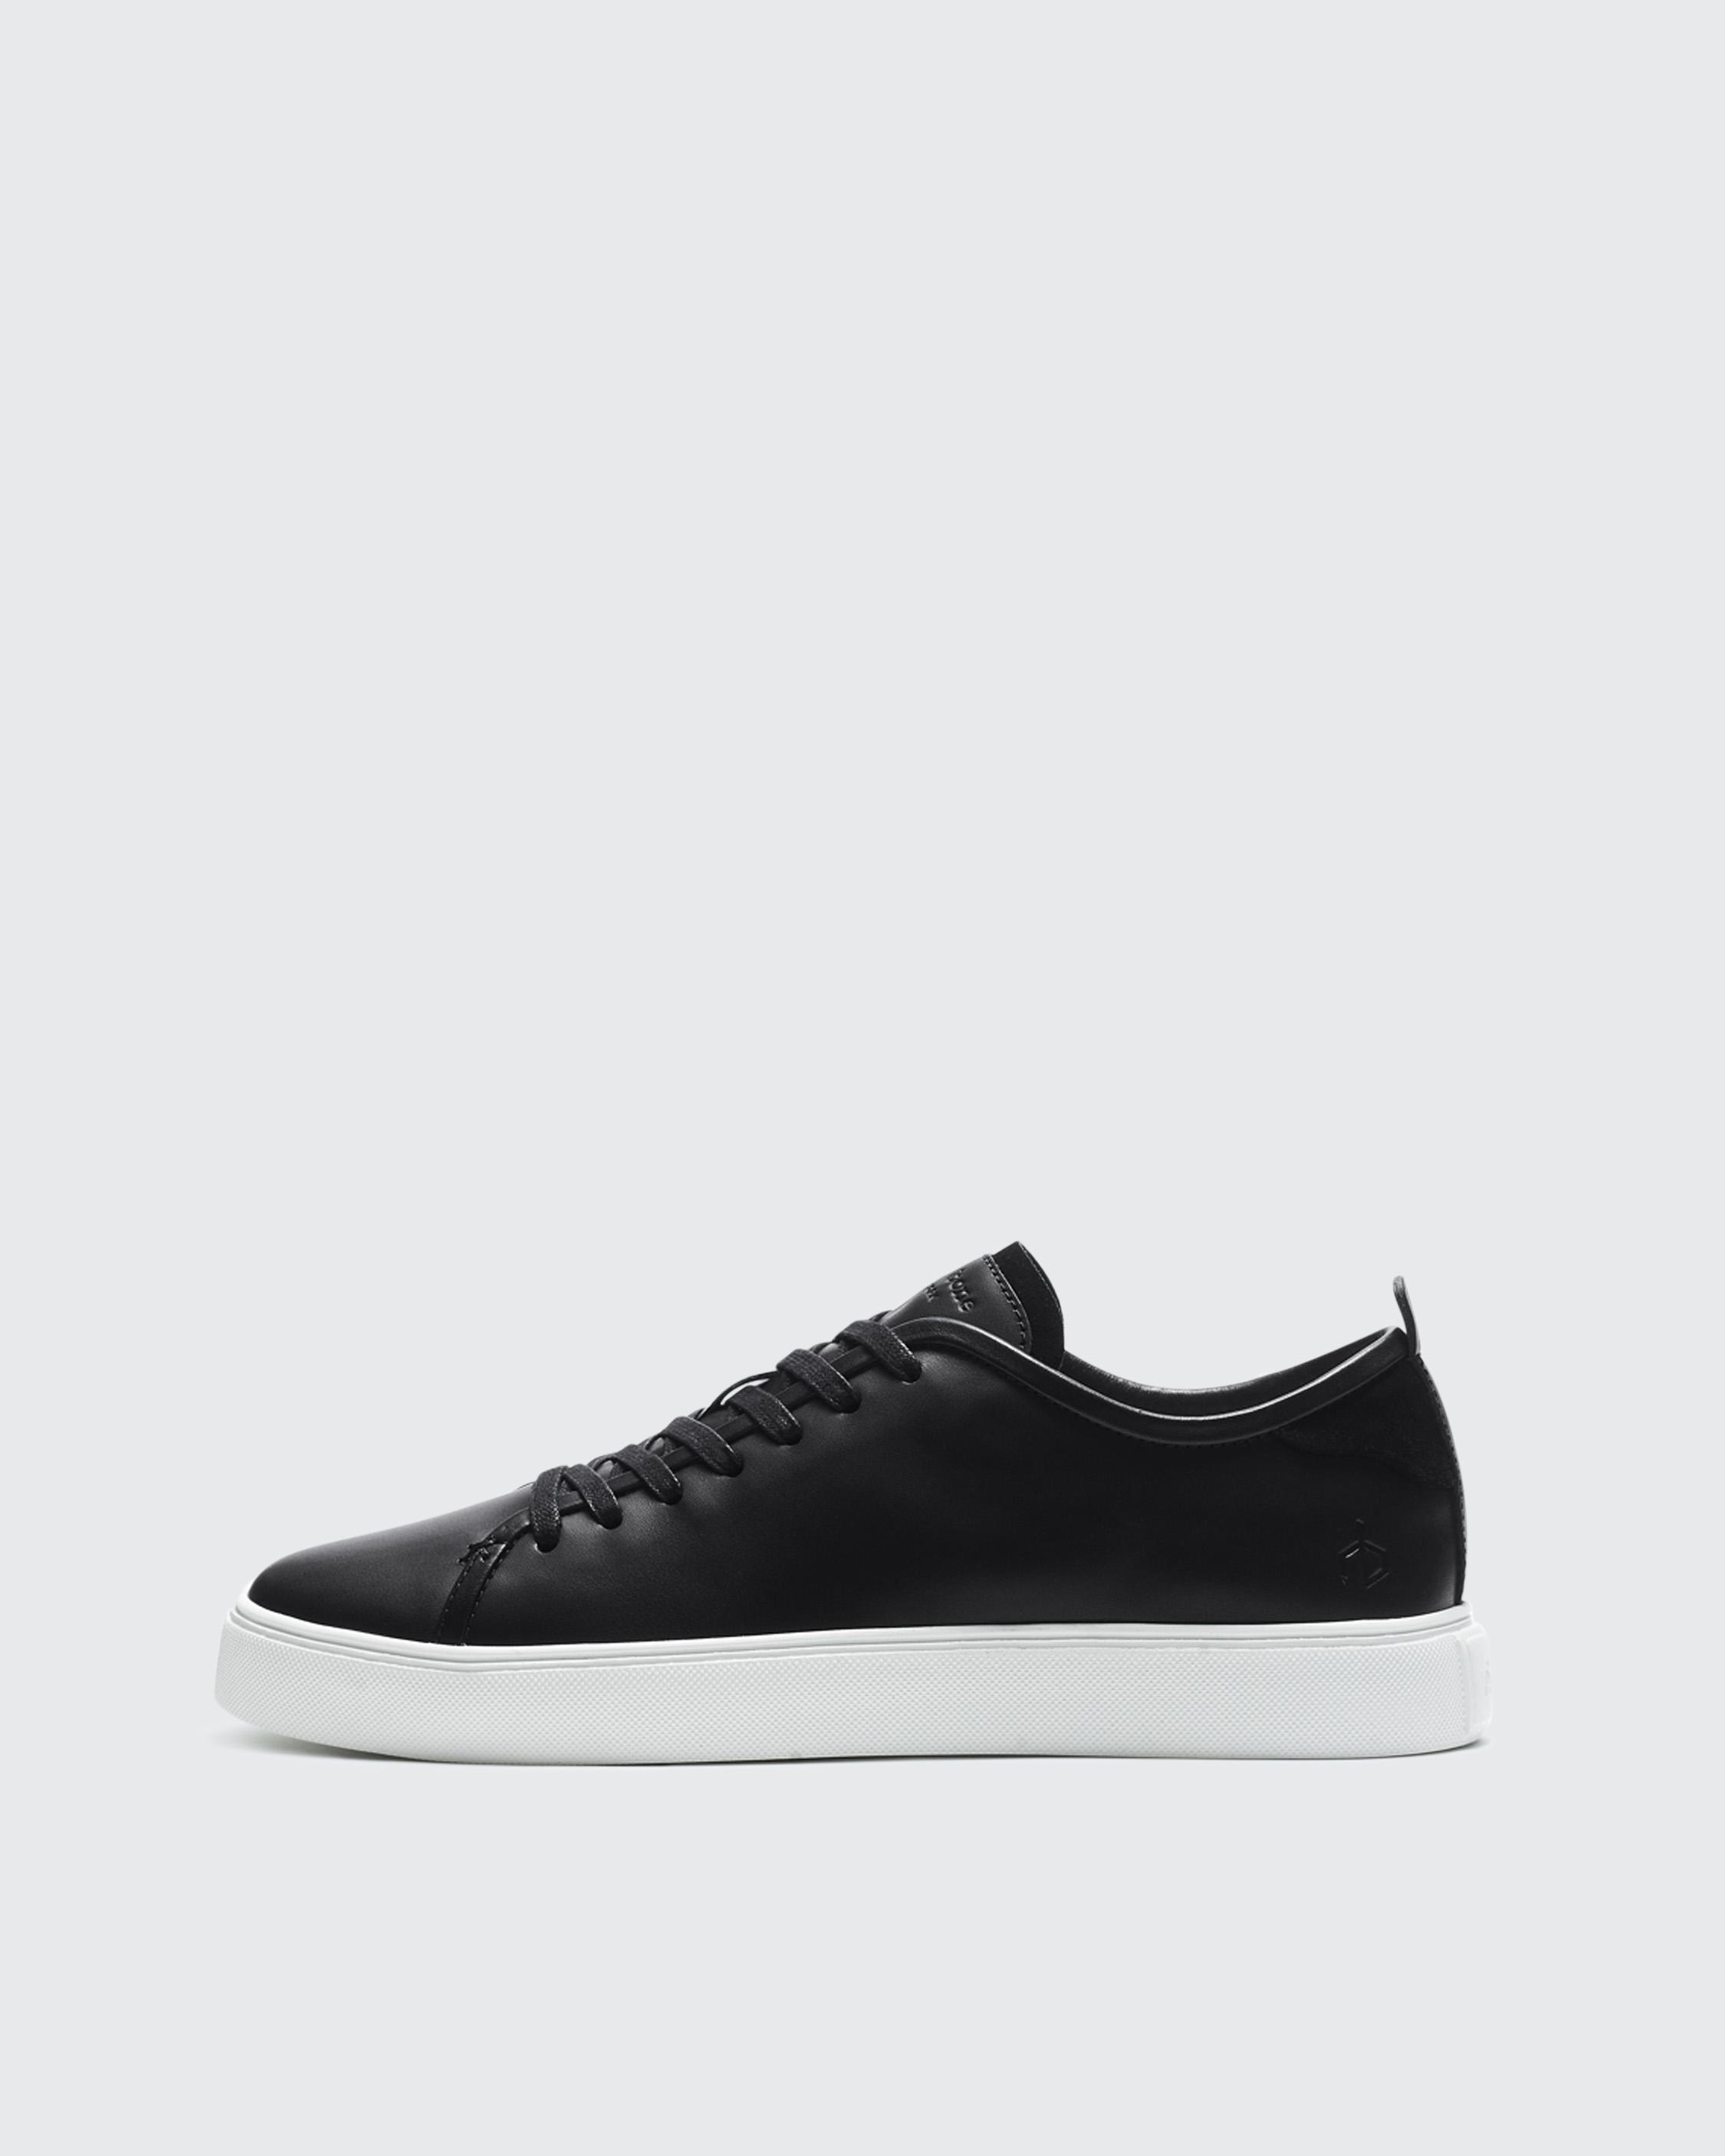 Perry Sneaker - Leather
Low Top Sneaker - 1